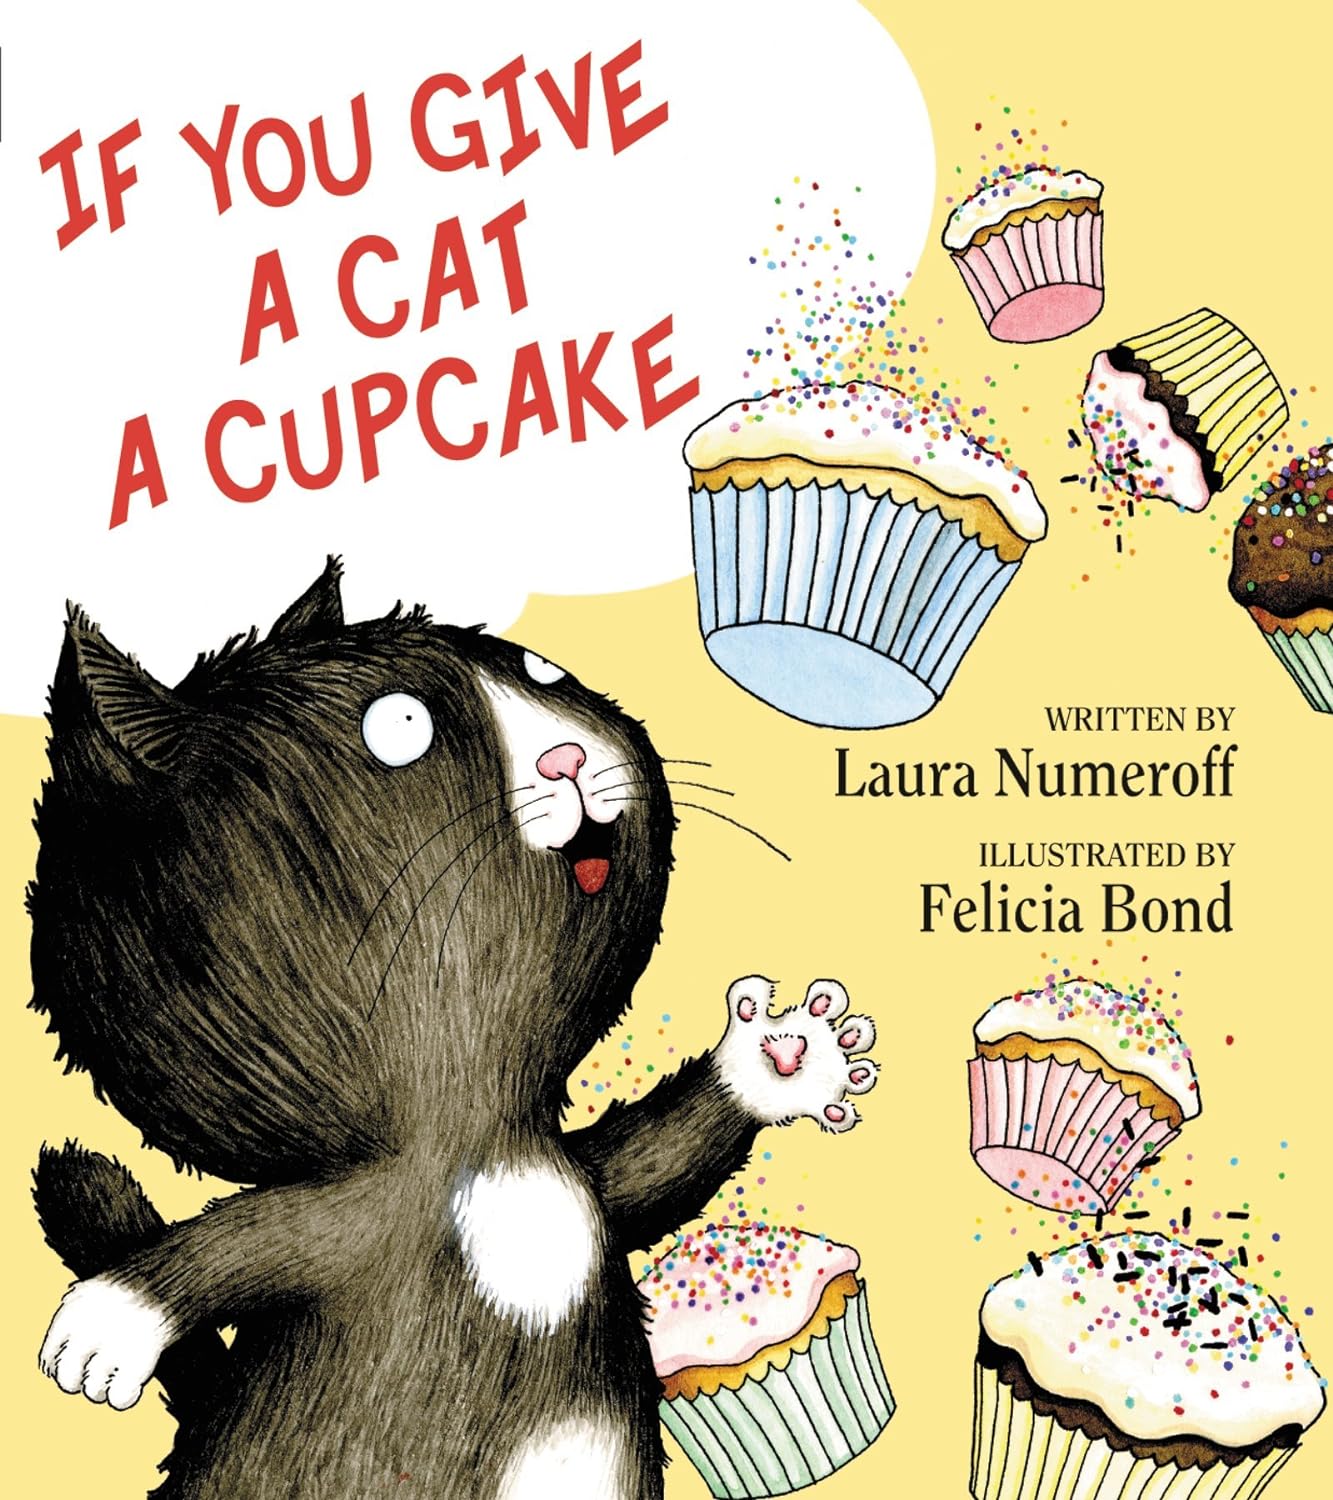 Laura Numeroff: If You Give a Cat a Cupcake (2008)